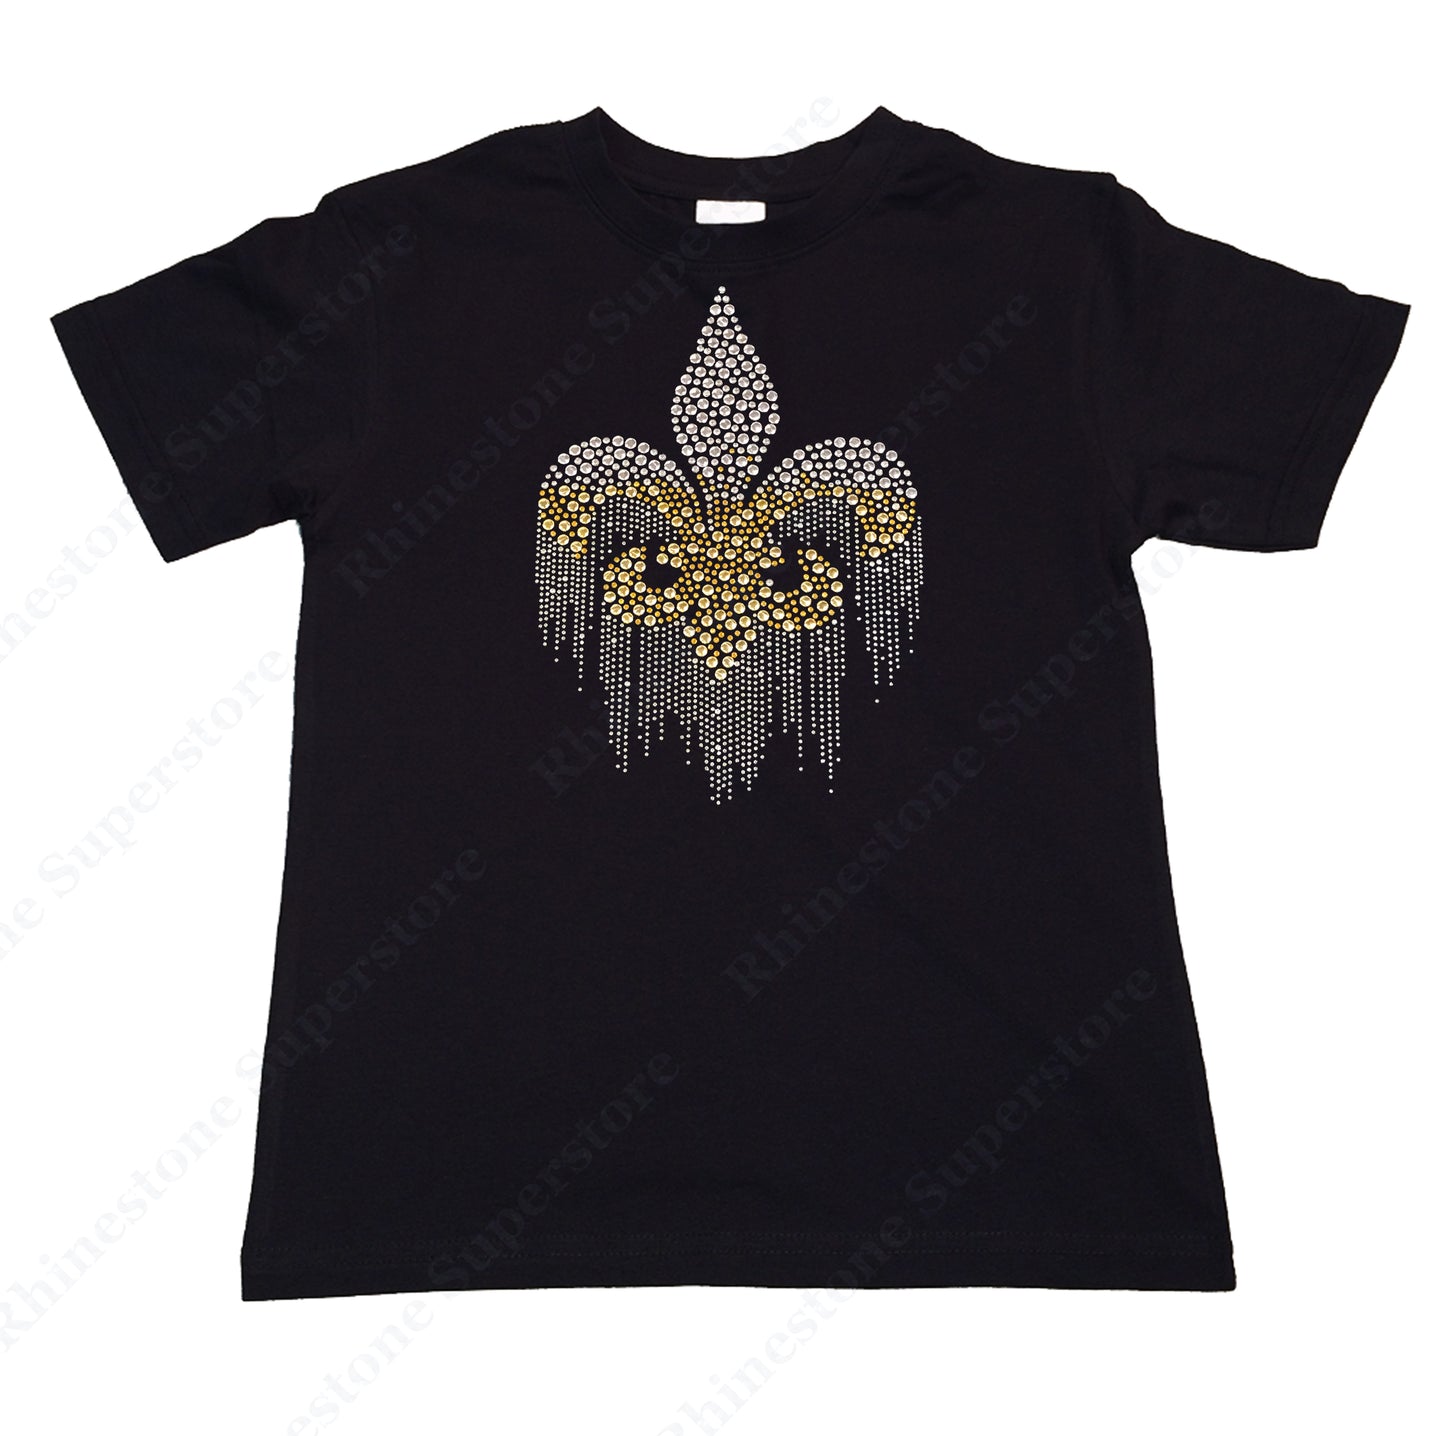 Girl's Rhinestone and Rhinestud T-Shirt " Fluer de Lis Dripping in Silver and Gold "